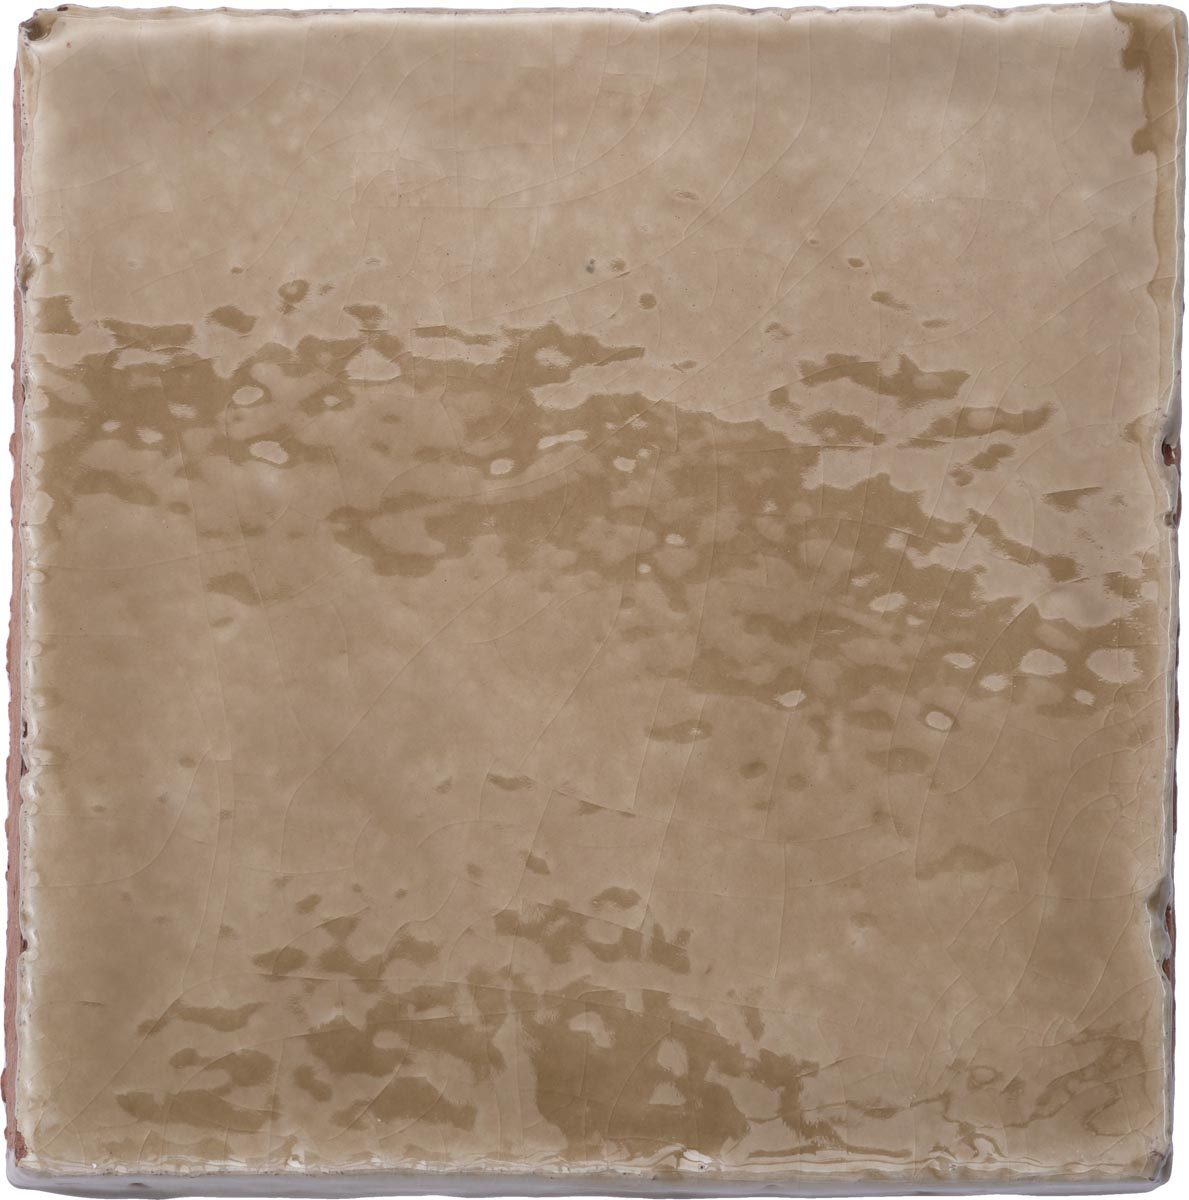 Ochre Square, product variant image